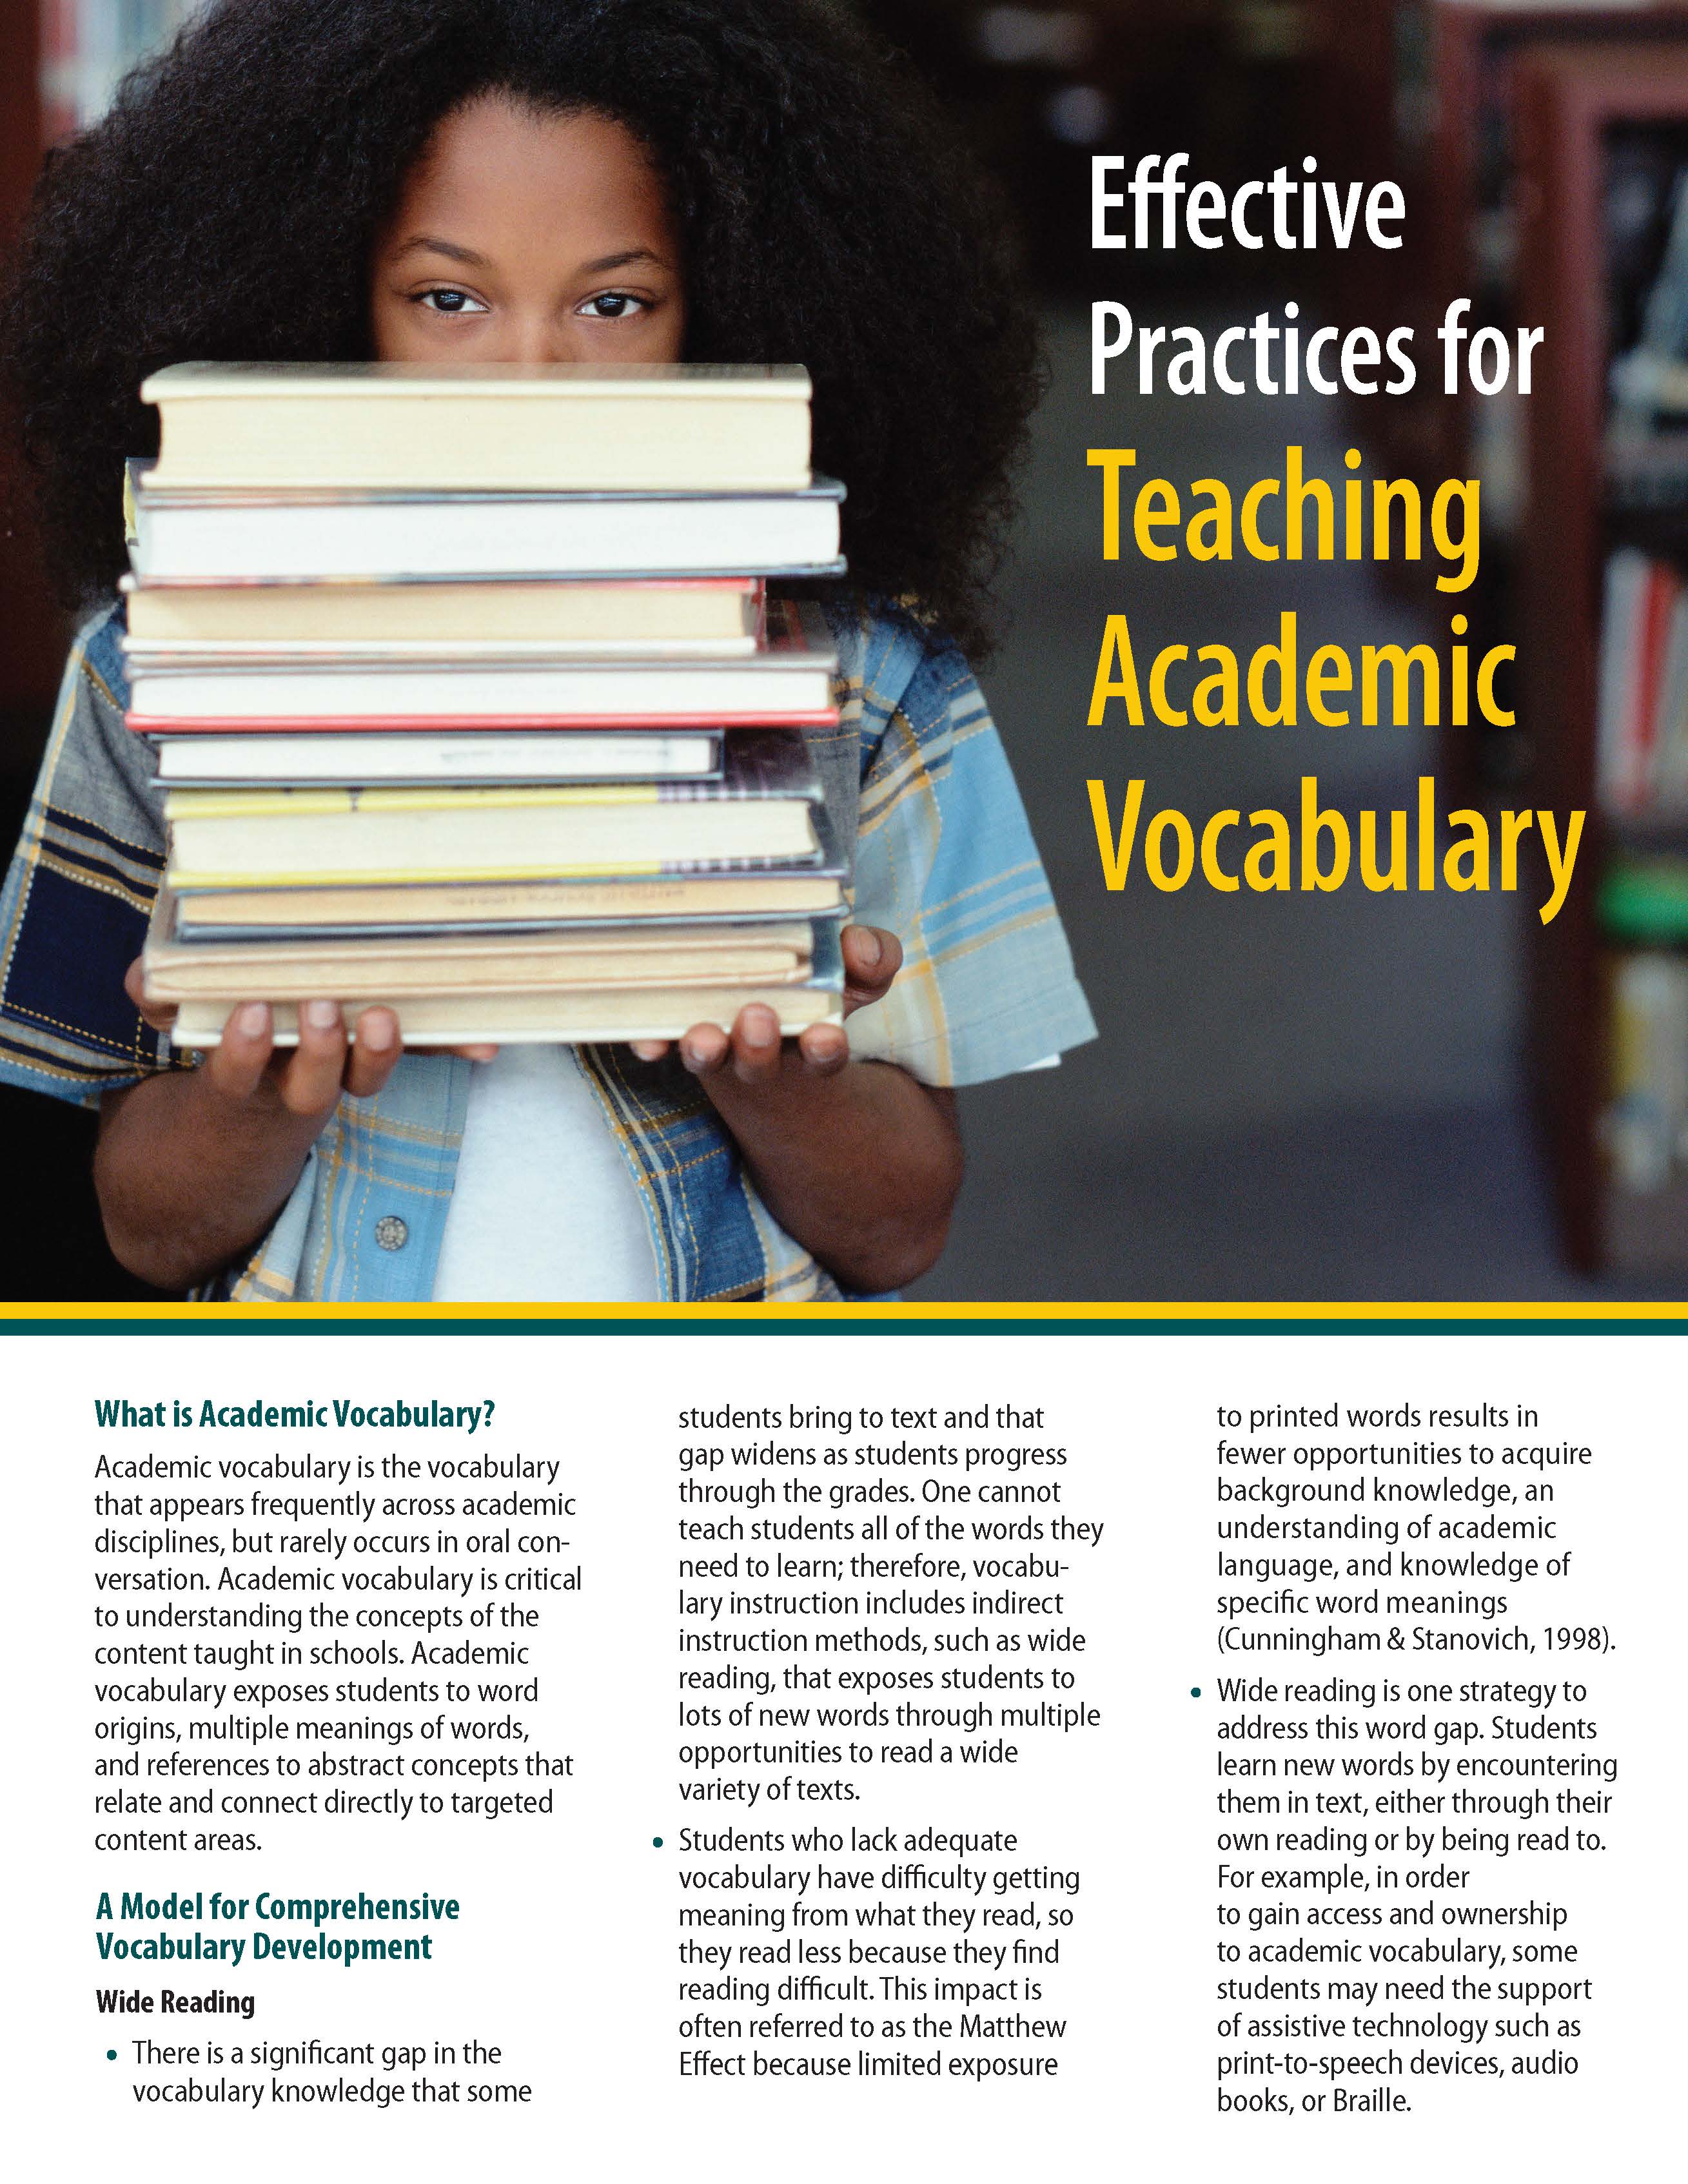 Effective Practices for Teaching Academic Vocabulary